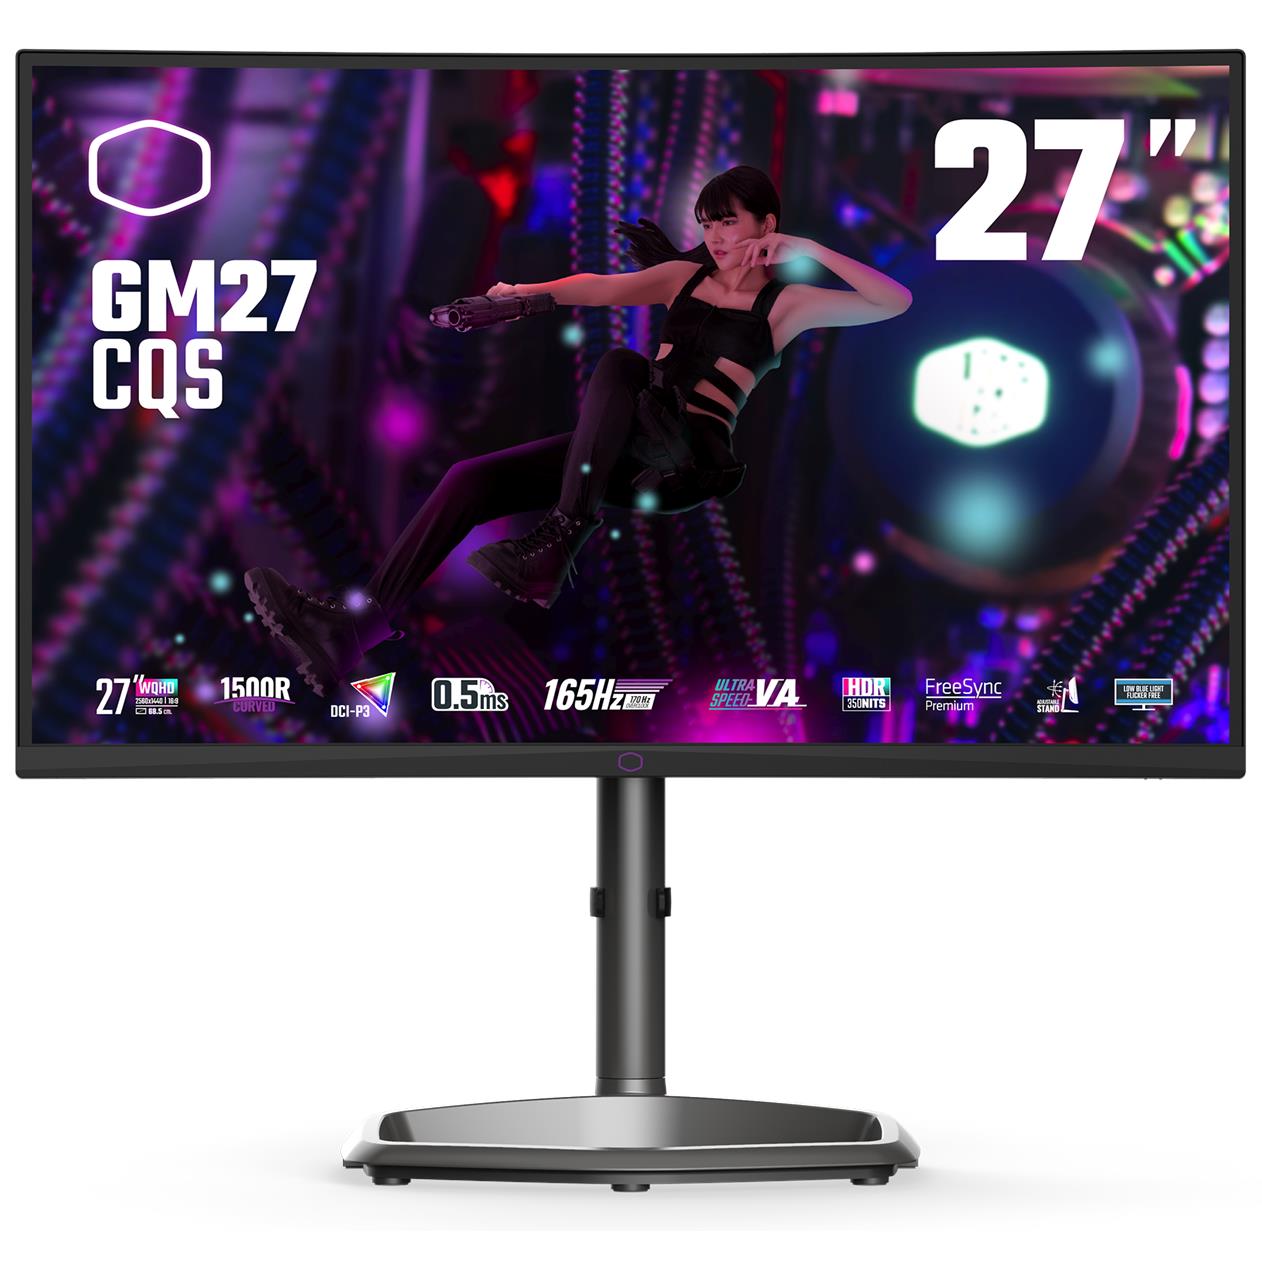 cooler master cmi-gm27-cqs 27" wqhd 165hz curved gaming monitor